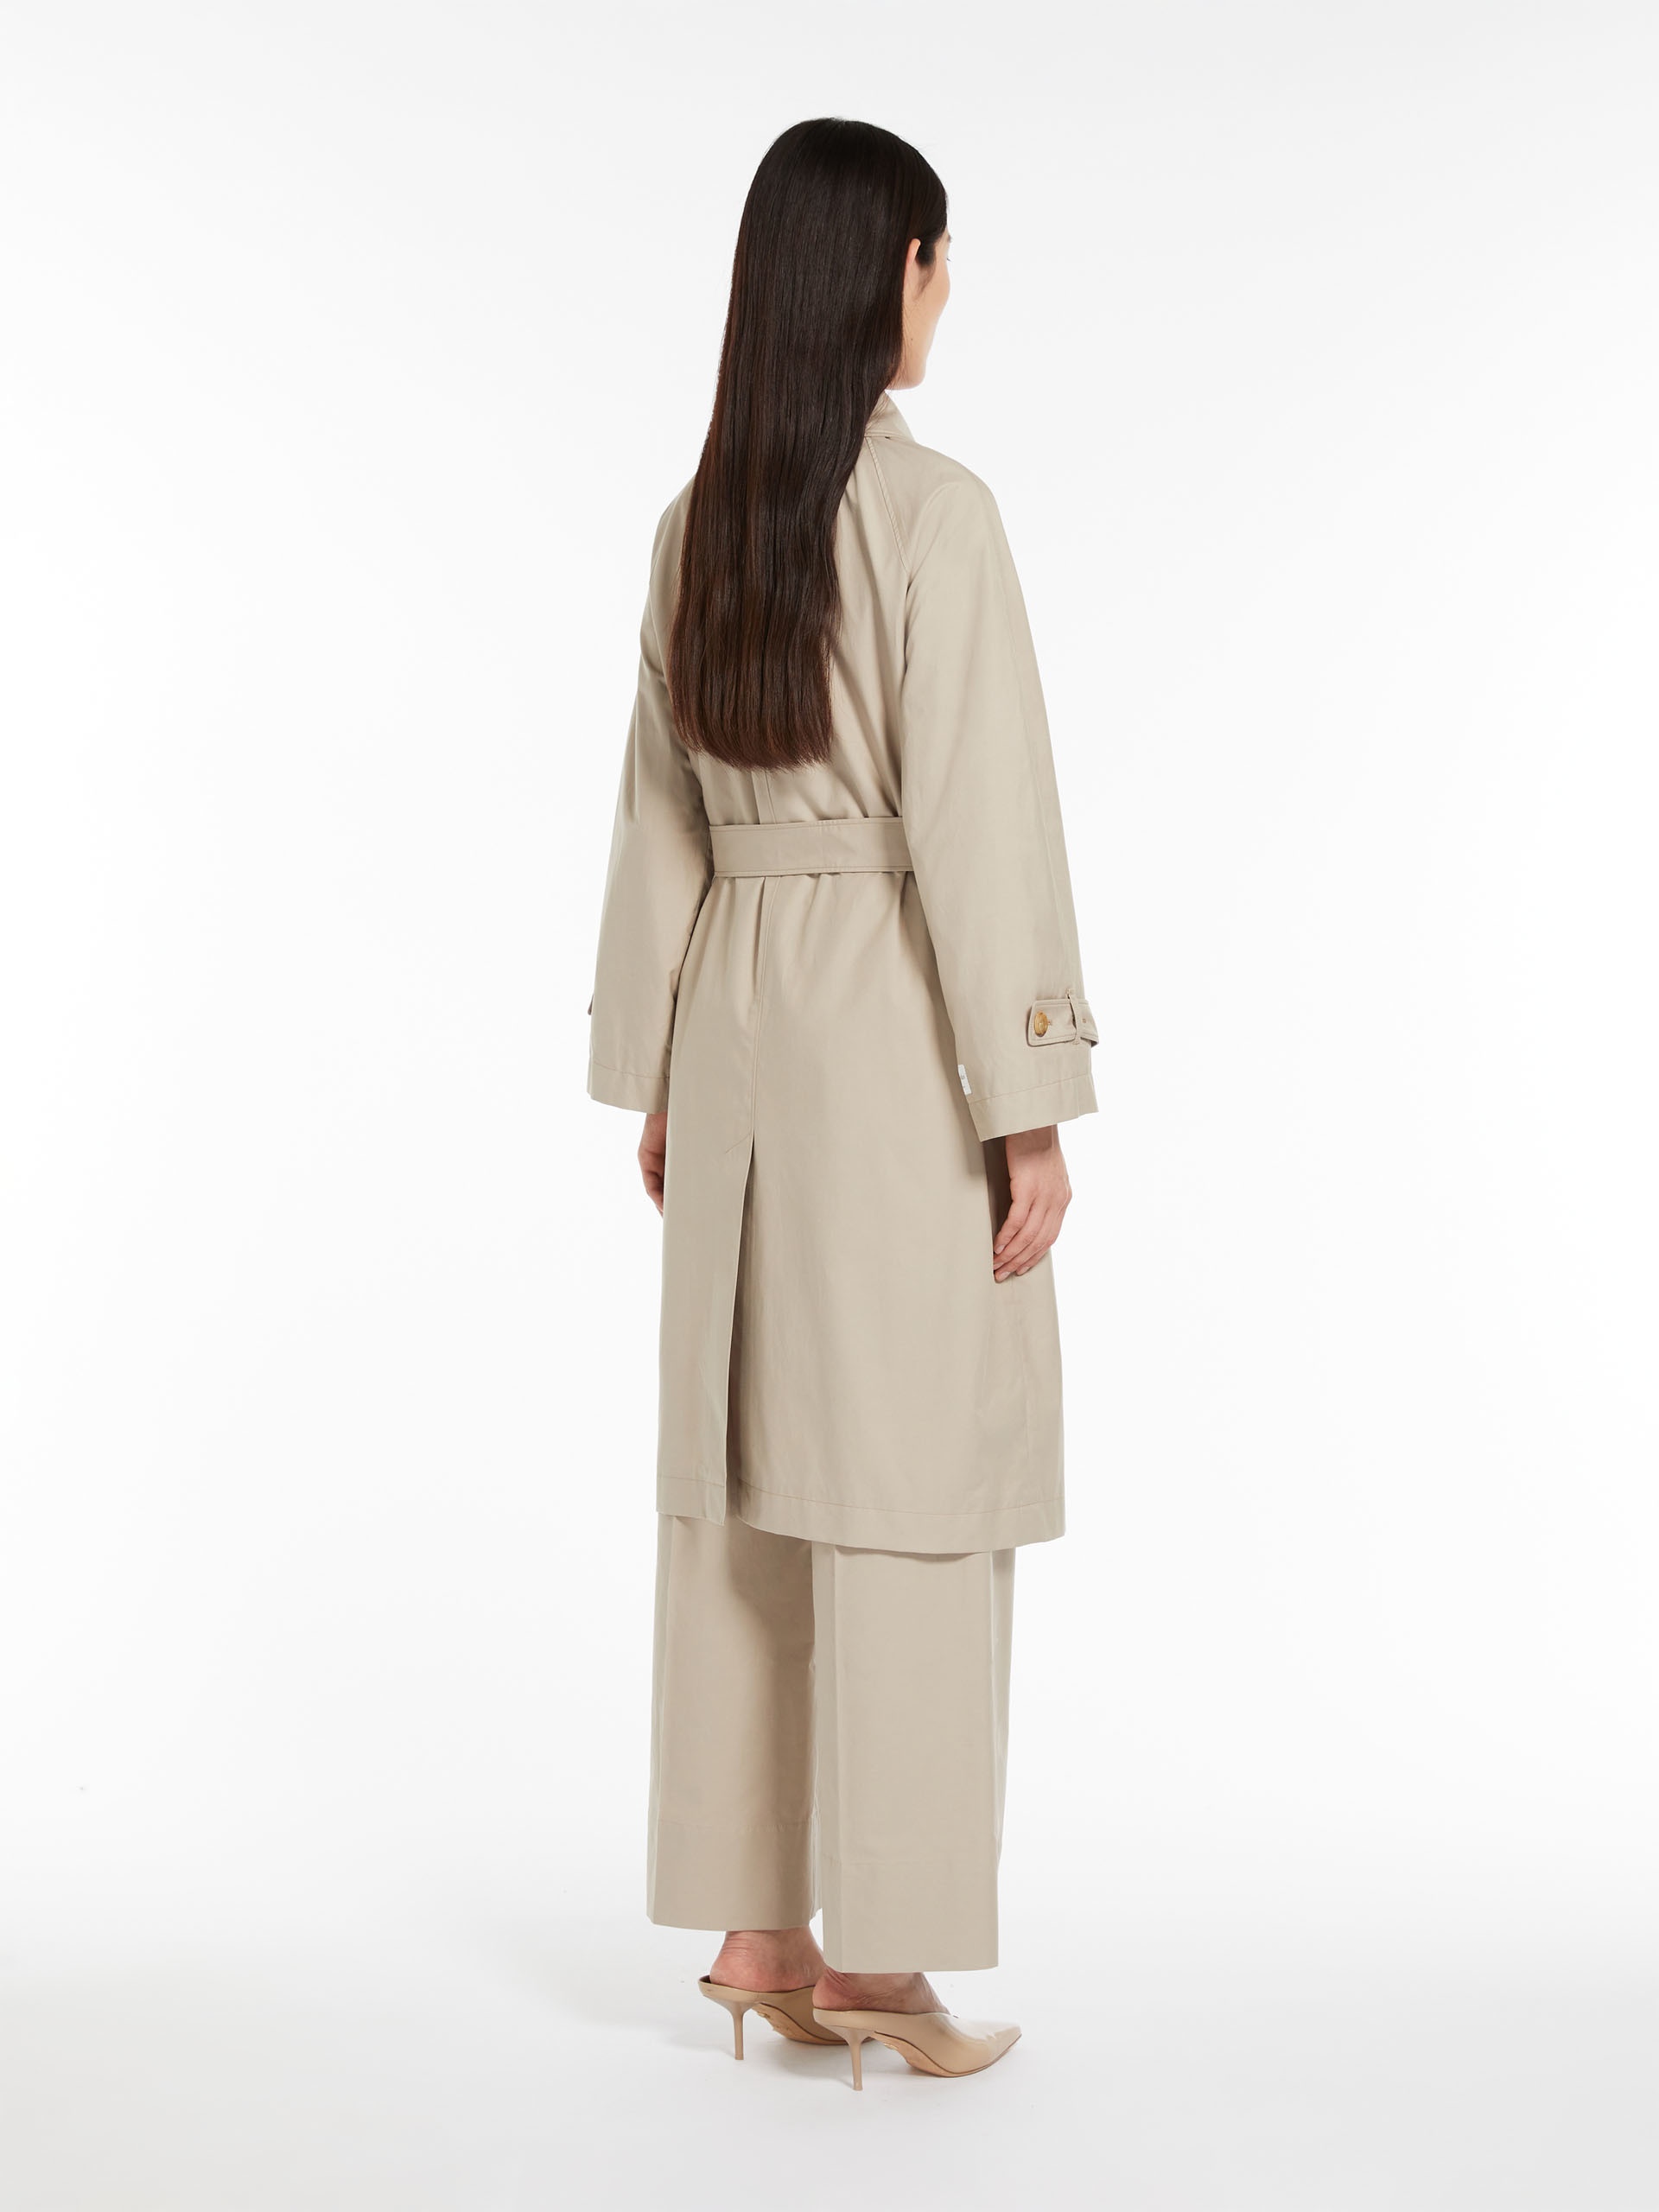 FTRENCH Single-breasted trench coat in water-resistant twill - 4